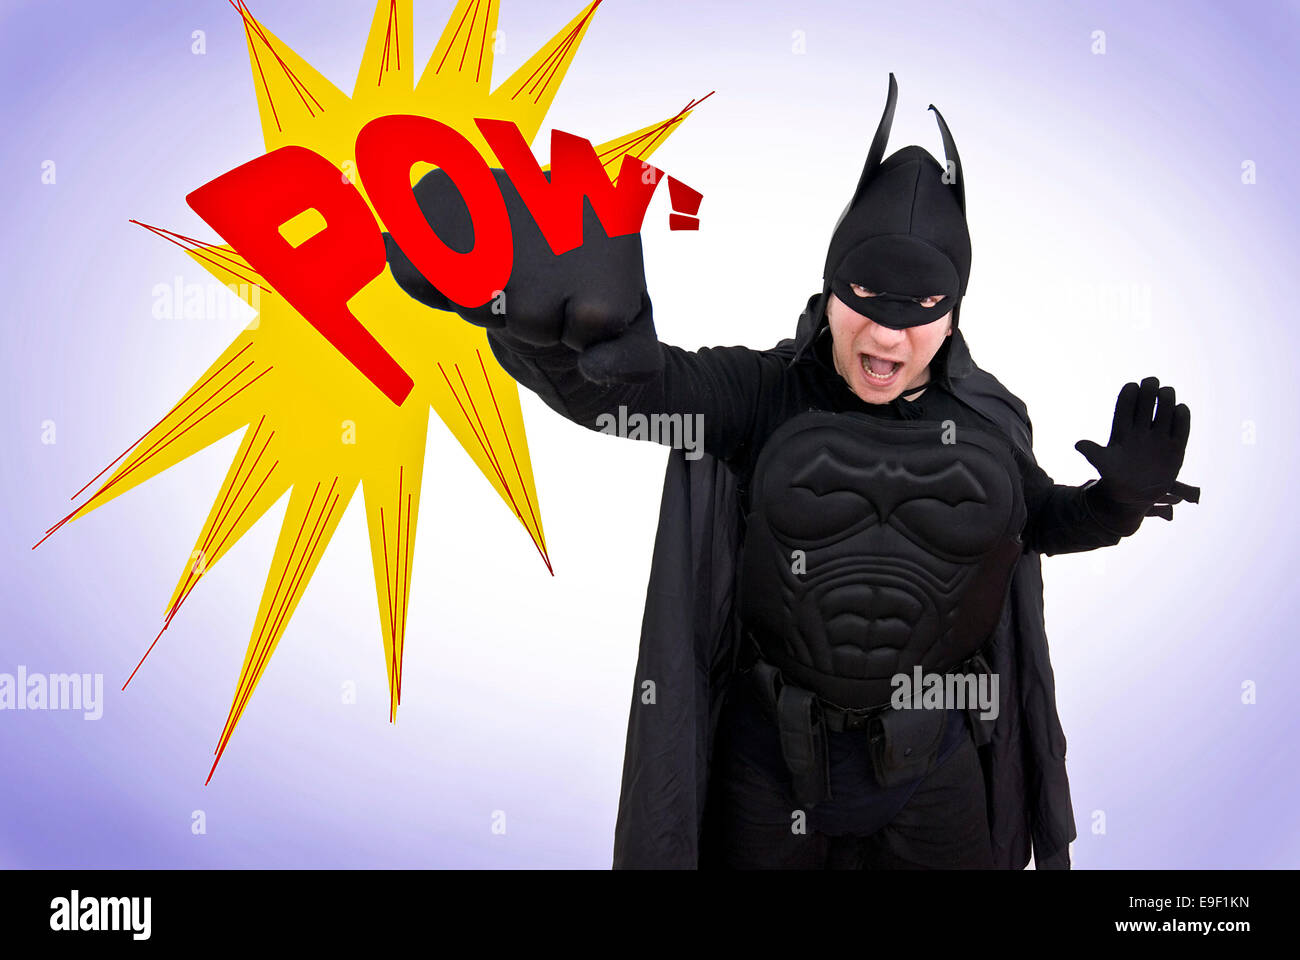 a man in a comedy batman costume punches the air with a giant POW sign, like the classic tv show Stock Photo